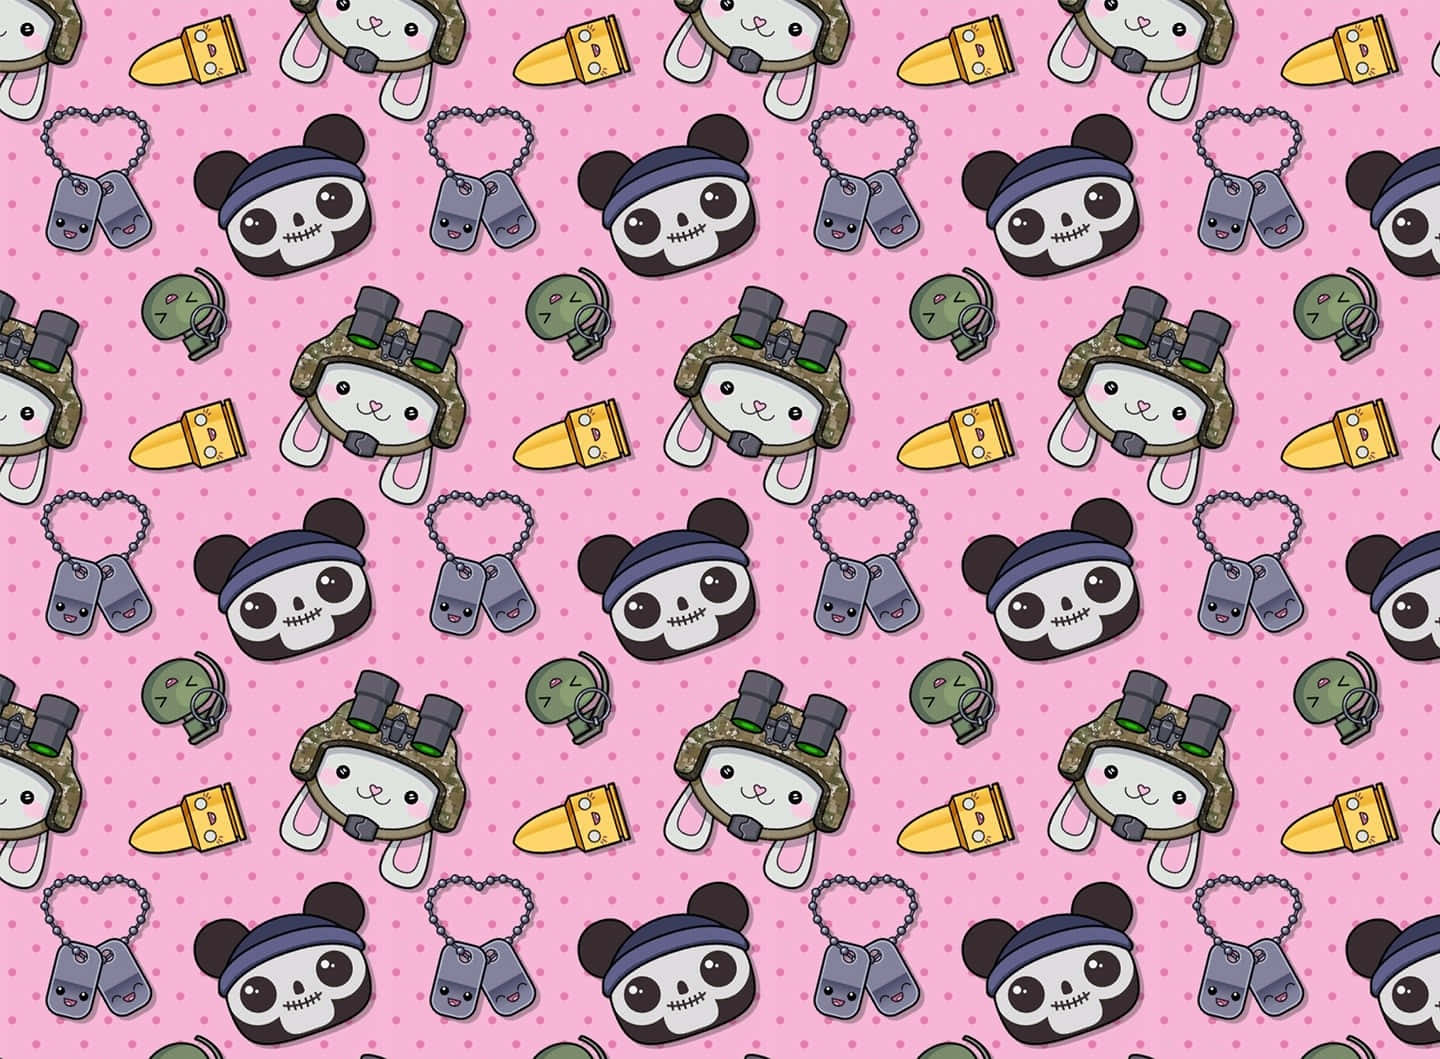 Get ready for a Kawaii experience with this cute iPad! Wallpaper